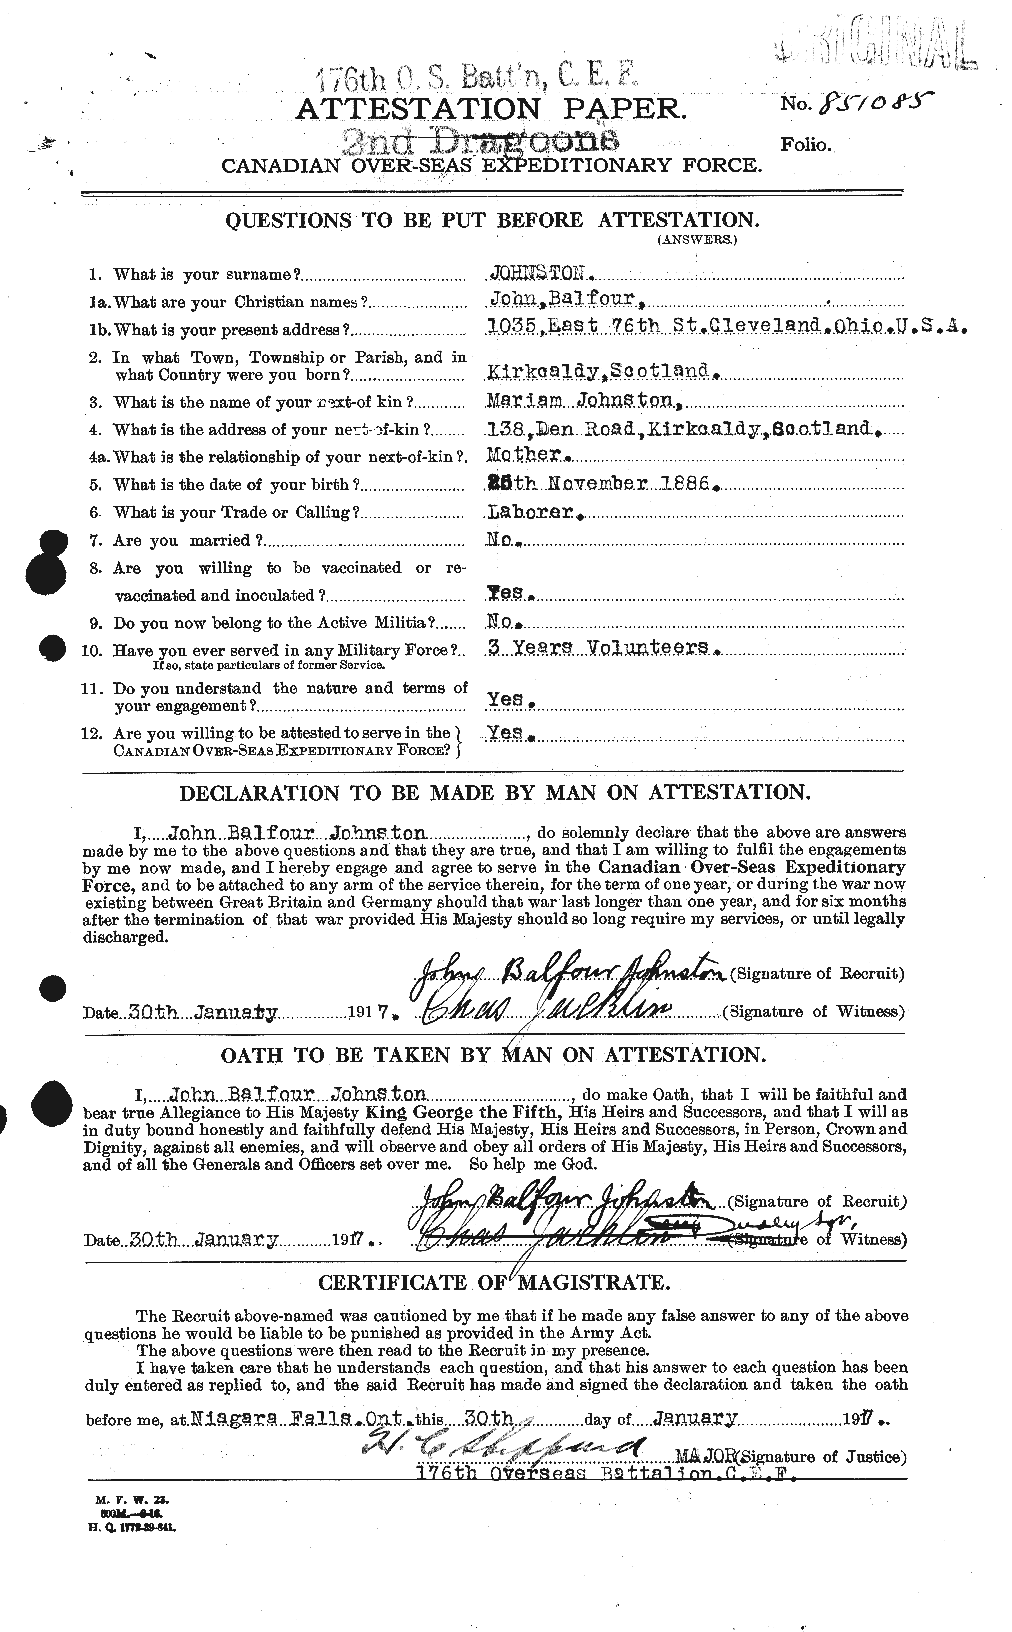 Personnel Records of the First World War - CEF 422818a